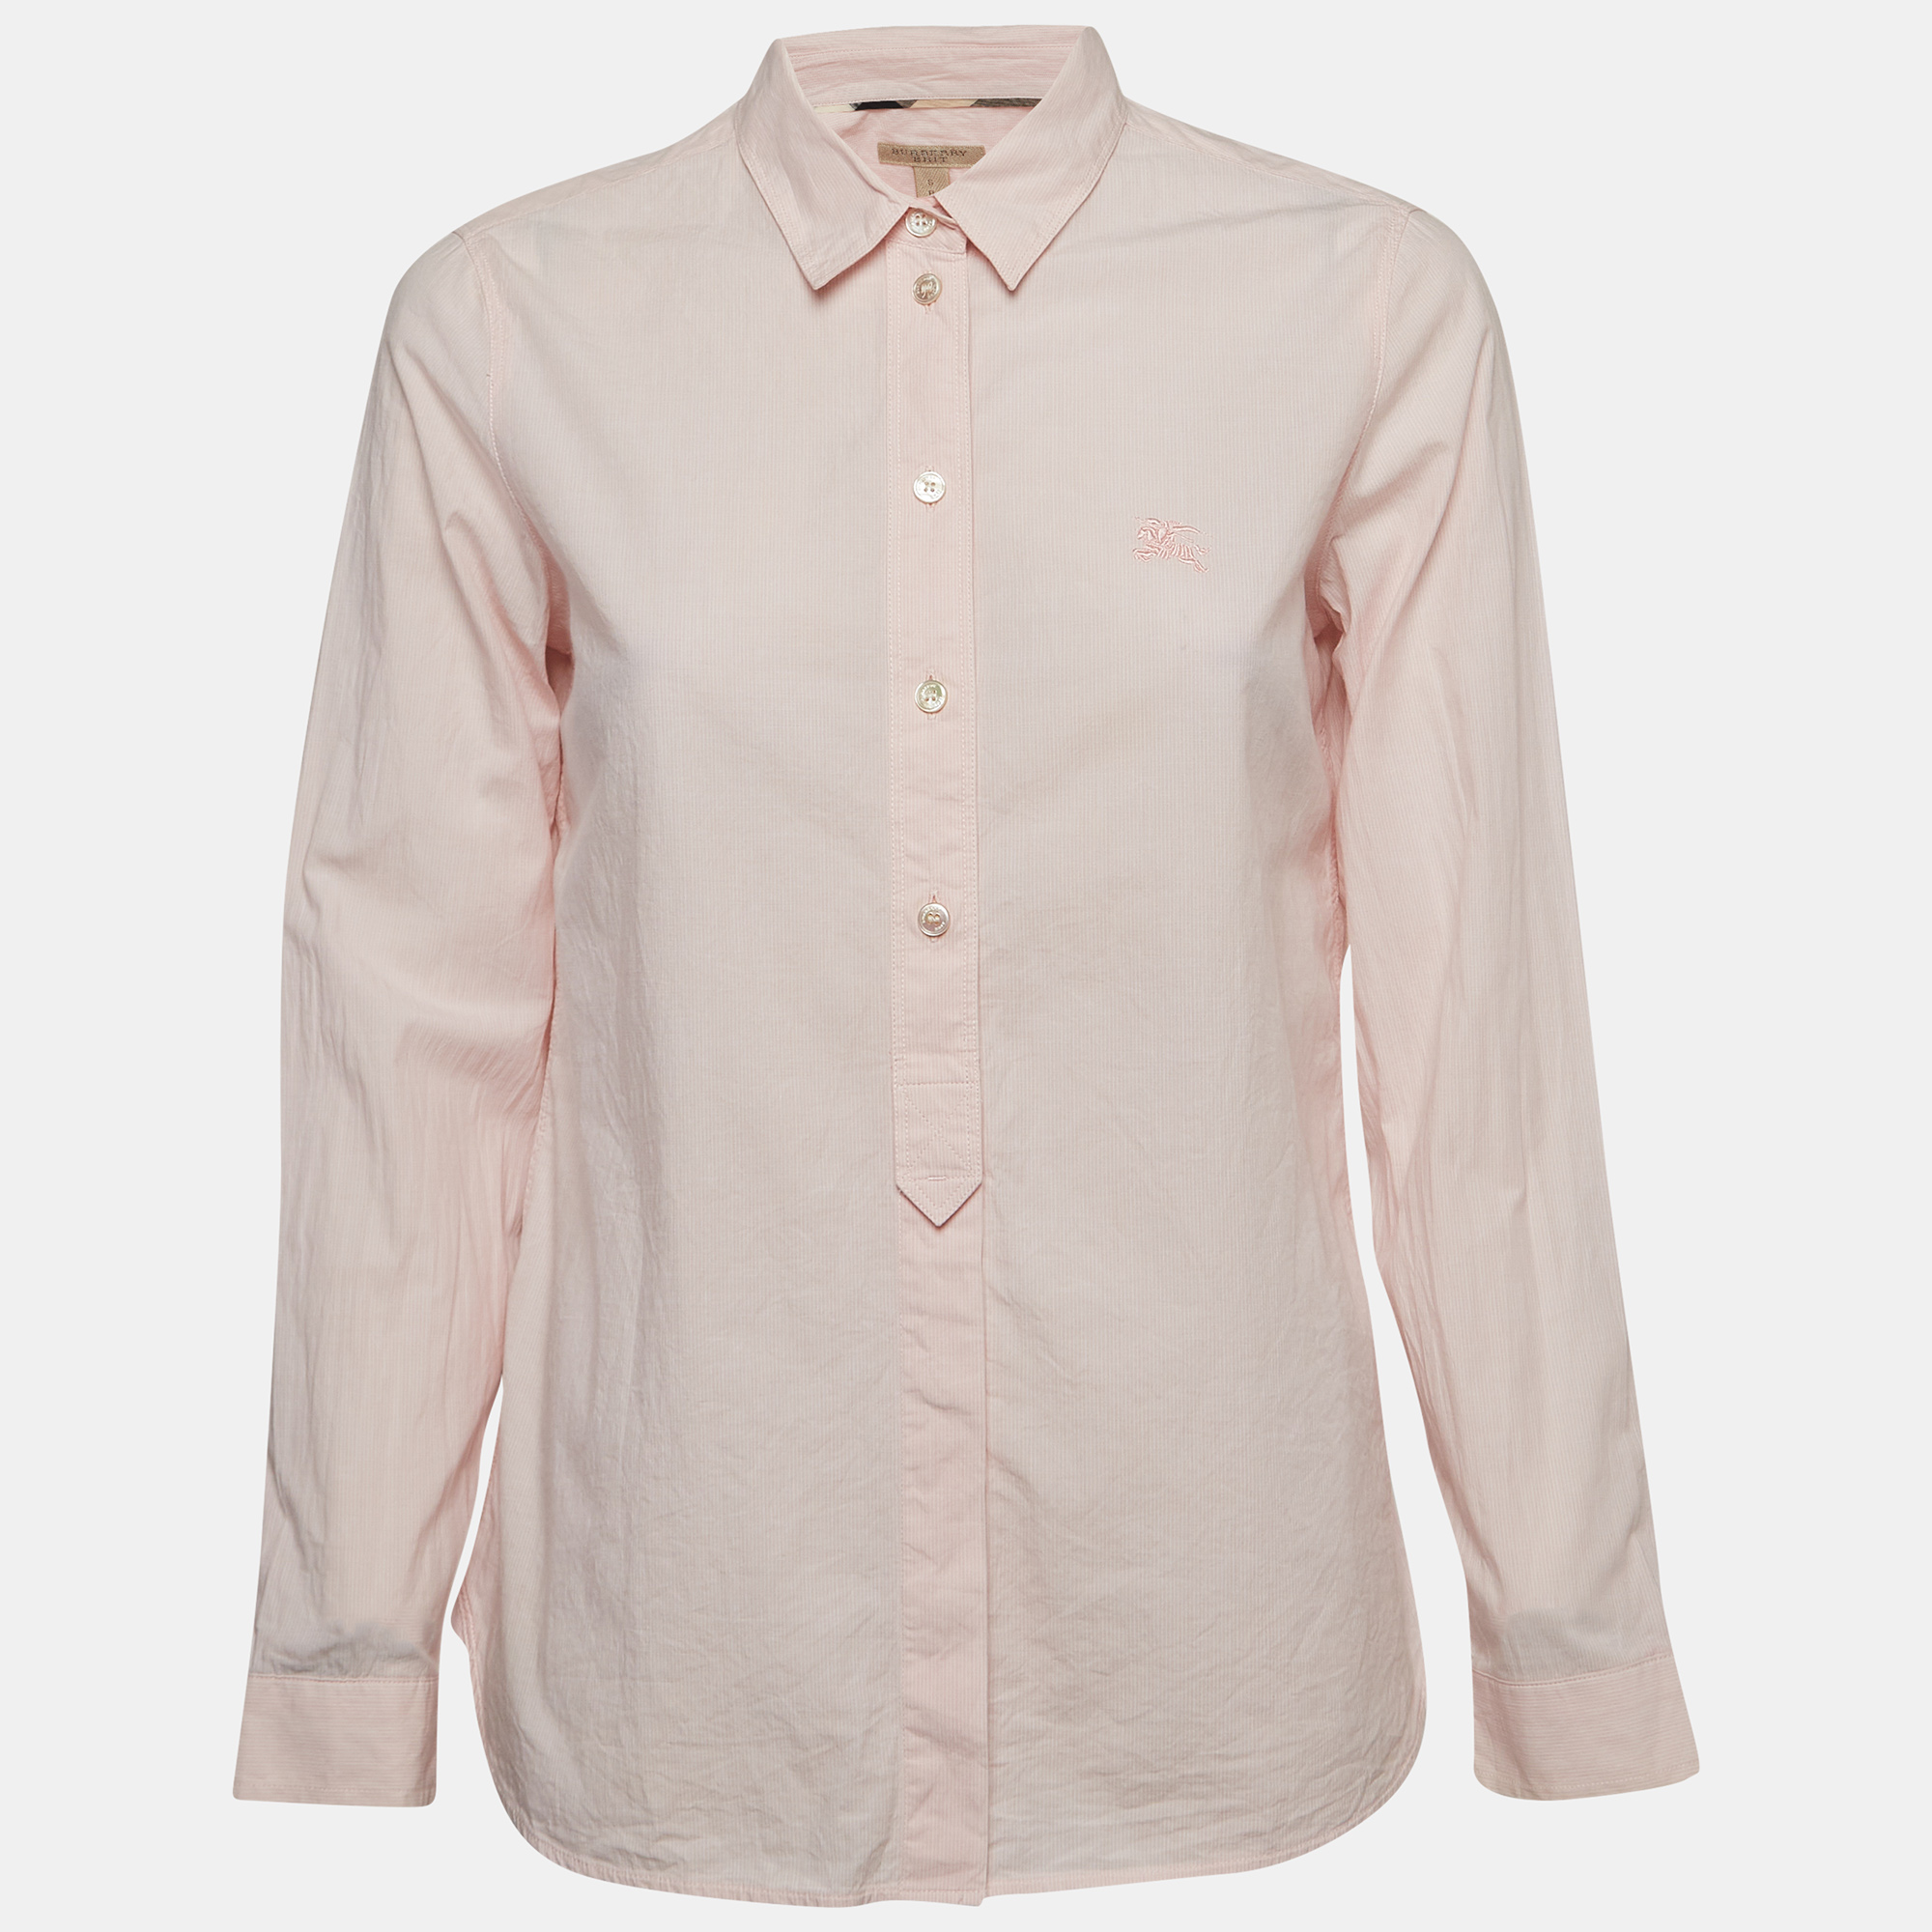 Burberry brit pink pinstriped cotton button front shirt s